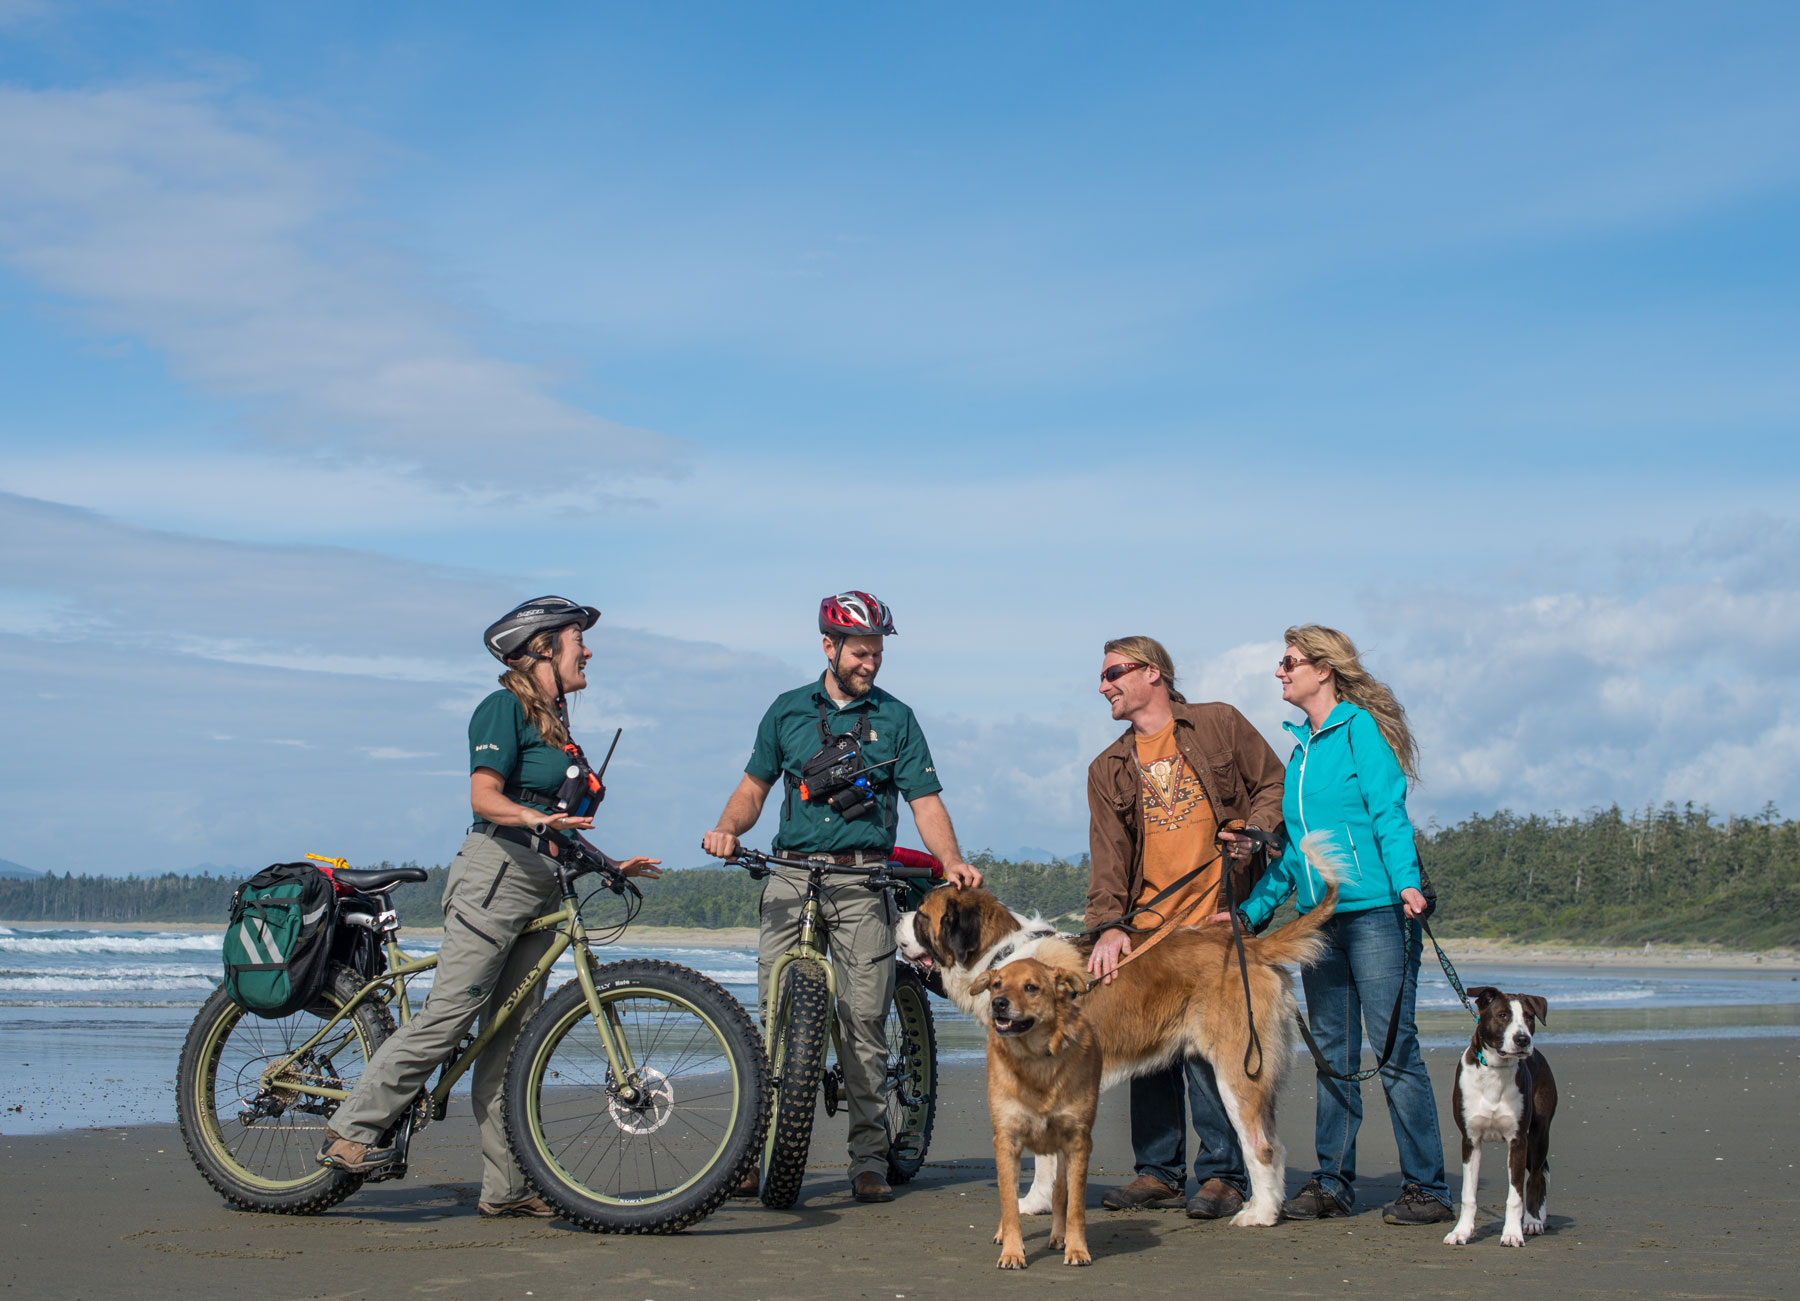 Parks Canada staff on bicycles talking with a couple on the beach with three dogs on leash